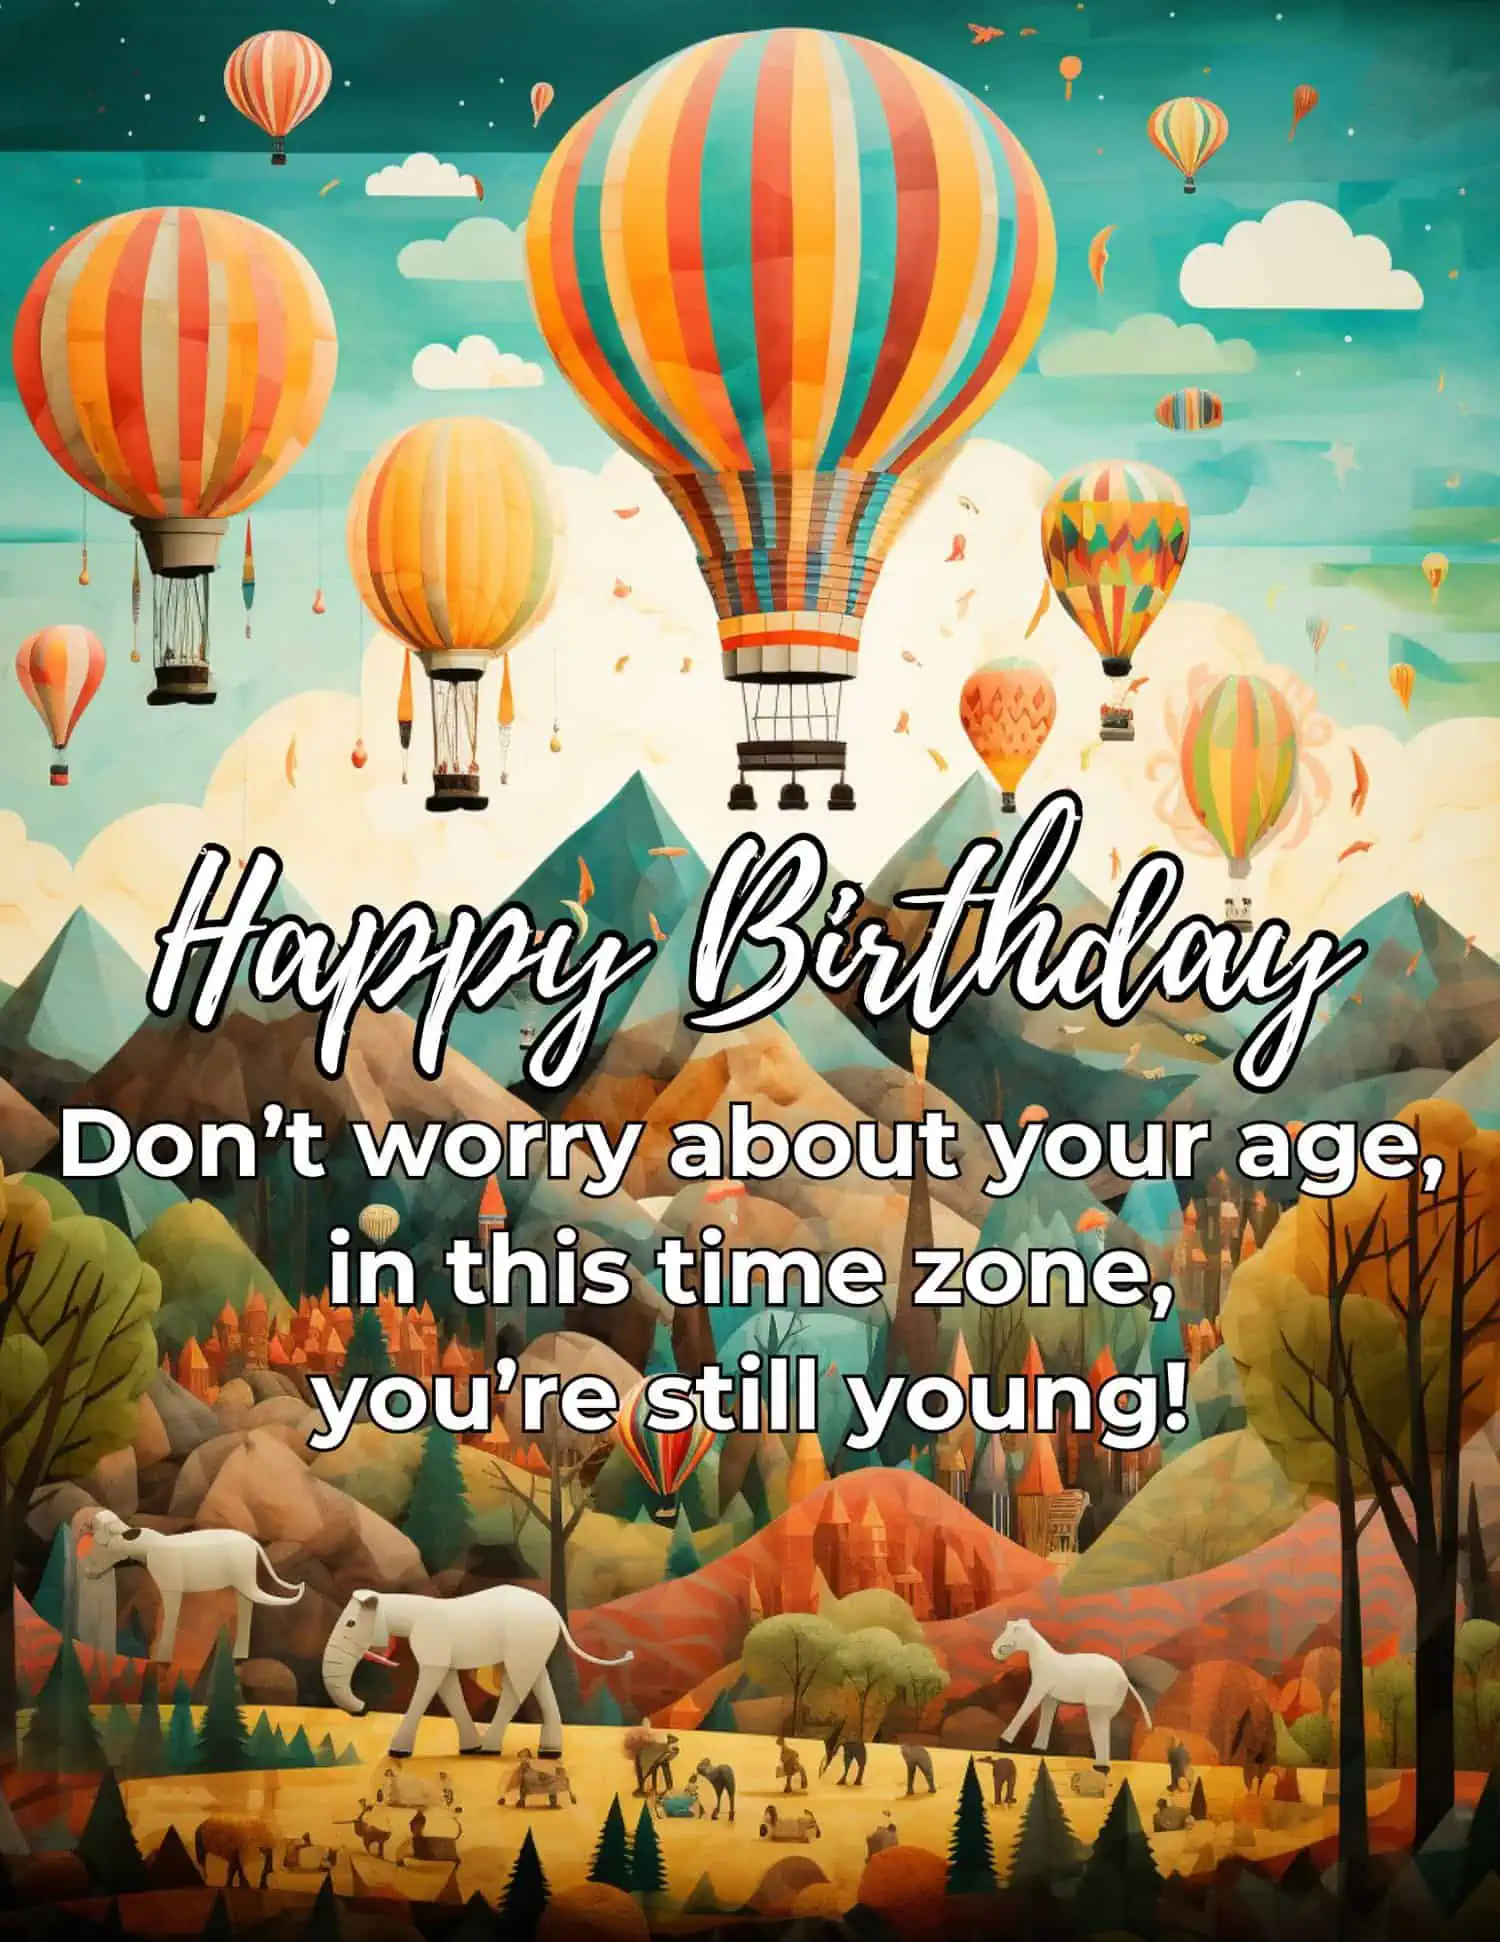 A collection of humorous and light-hearted long distance birthday messages, ideal for bringing a smile to those celebrating far away, reminding them of the joy and connection despite the distance.